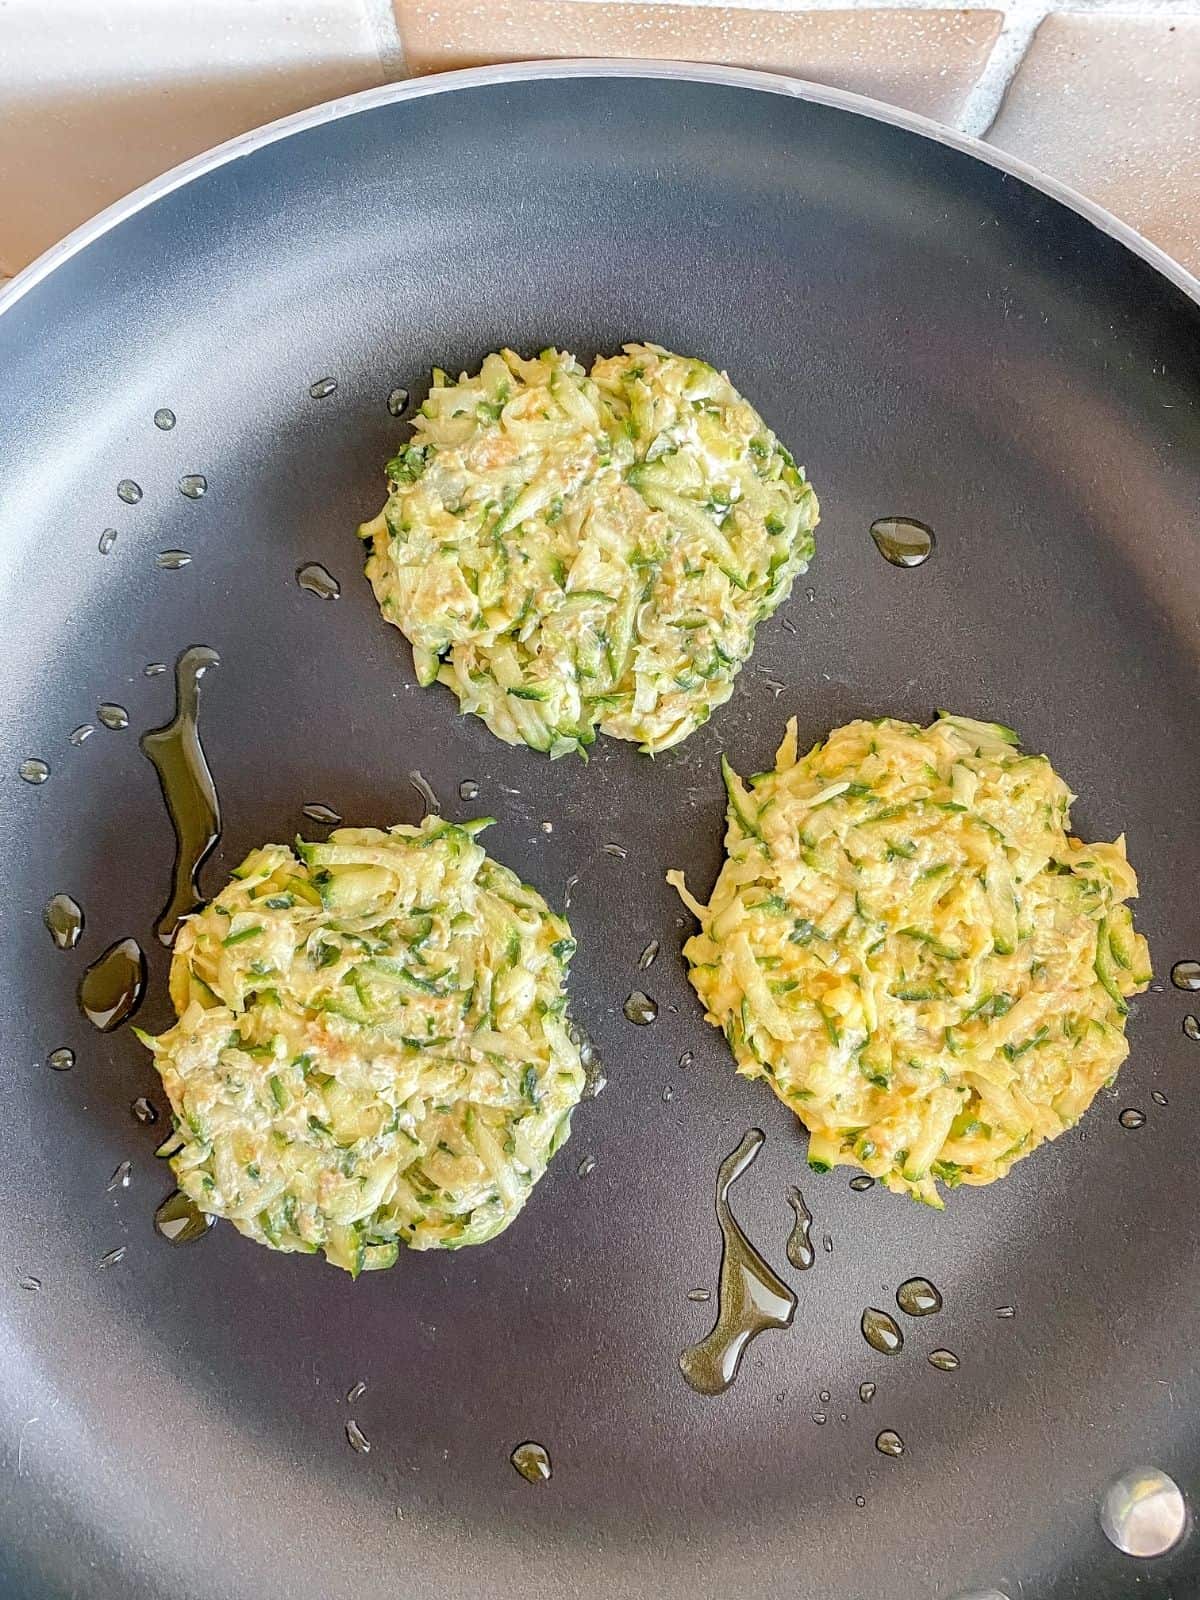 zucchini fritters being fried in a pan.